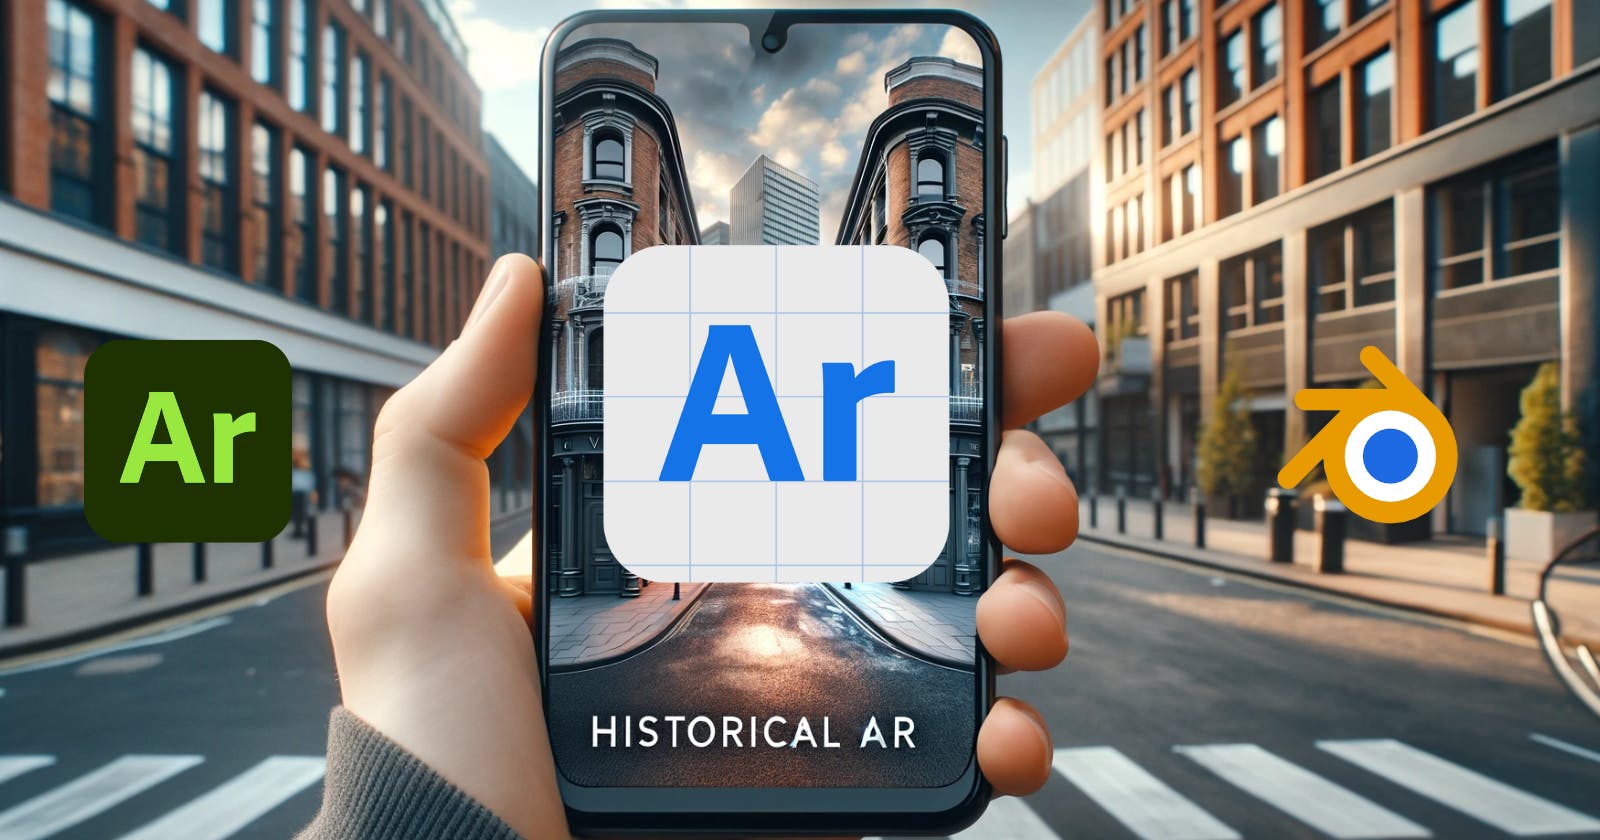 Creating a Window to the Past: How to Build Location-Based AR for Historical Places